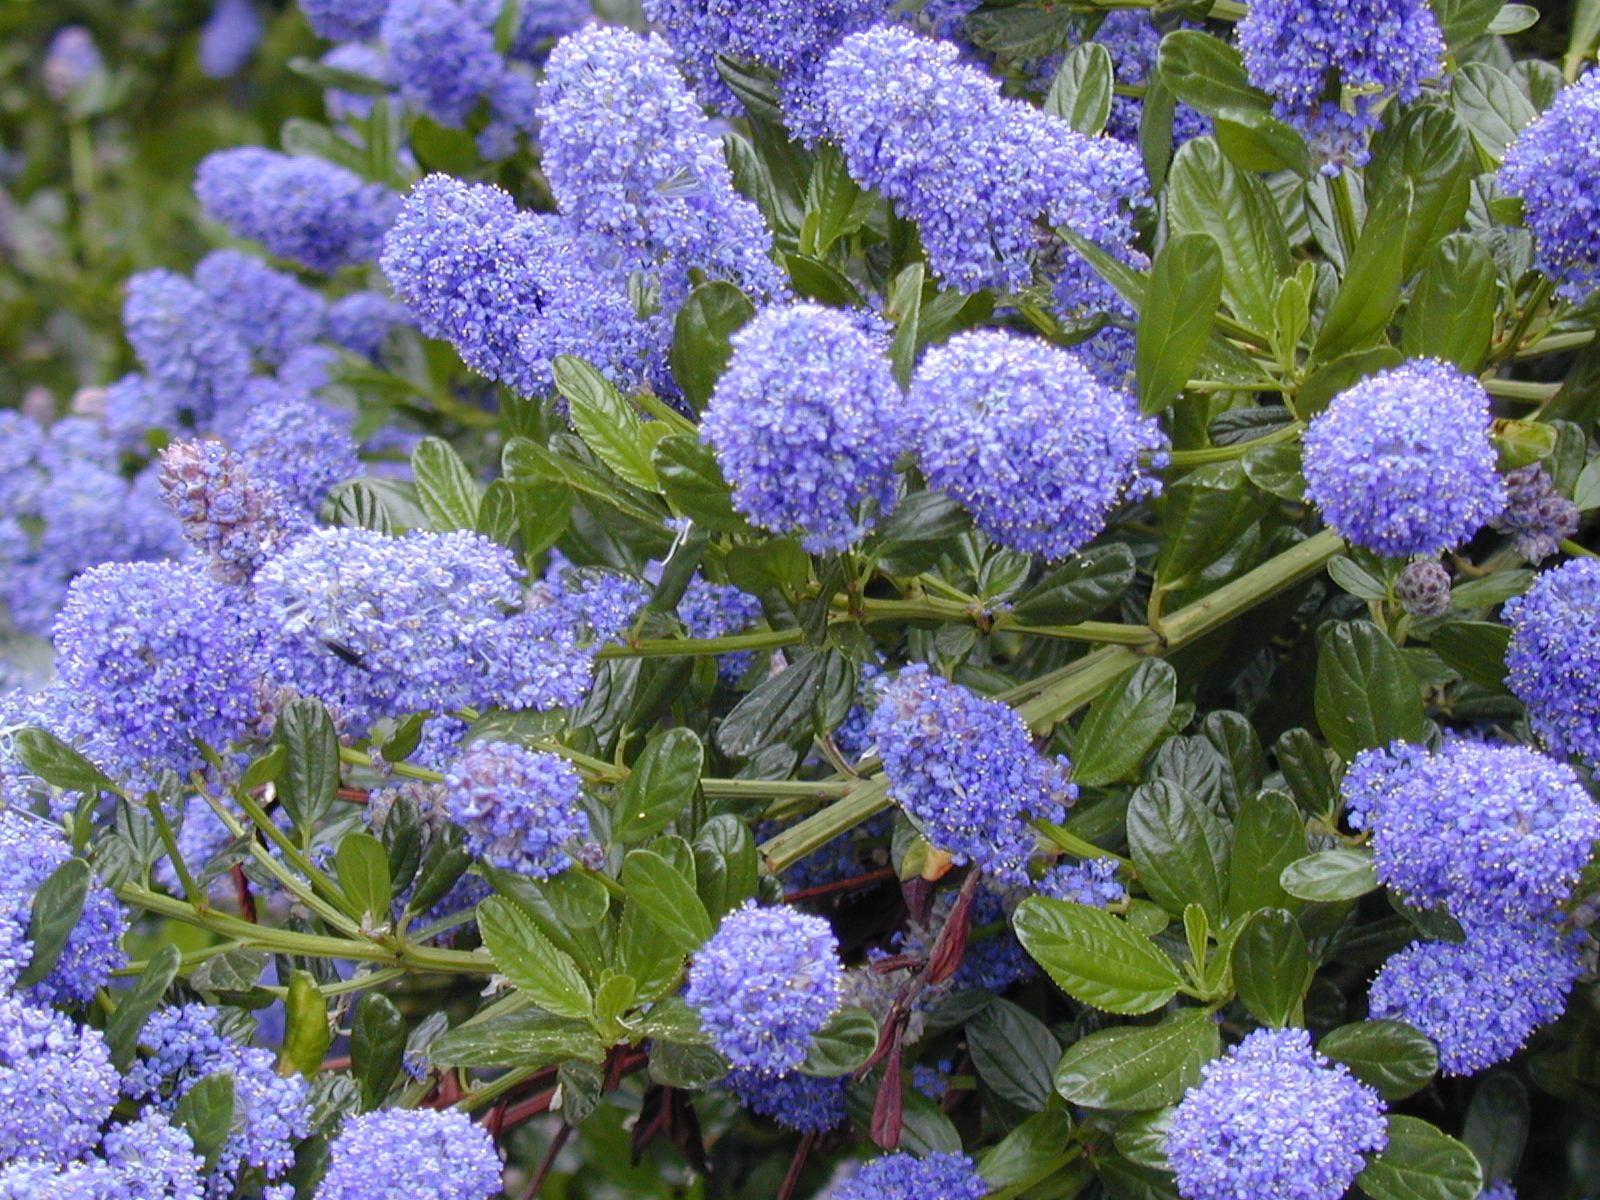 close up of blue purple flowers thickly covering green shrub